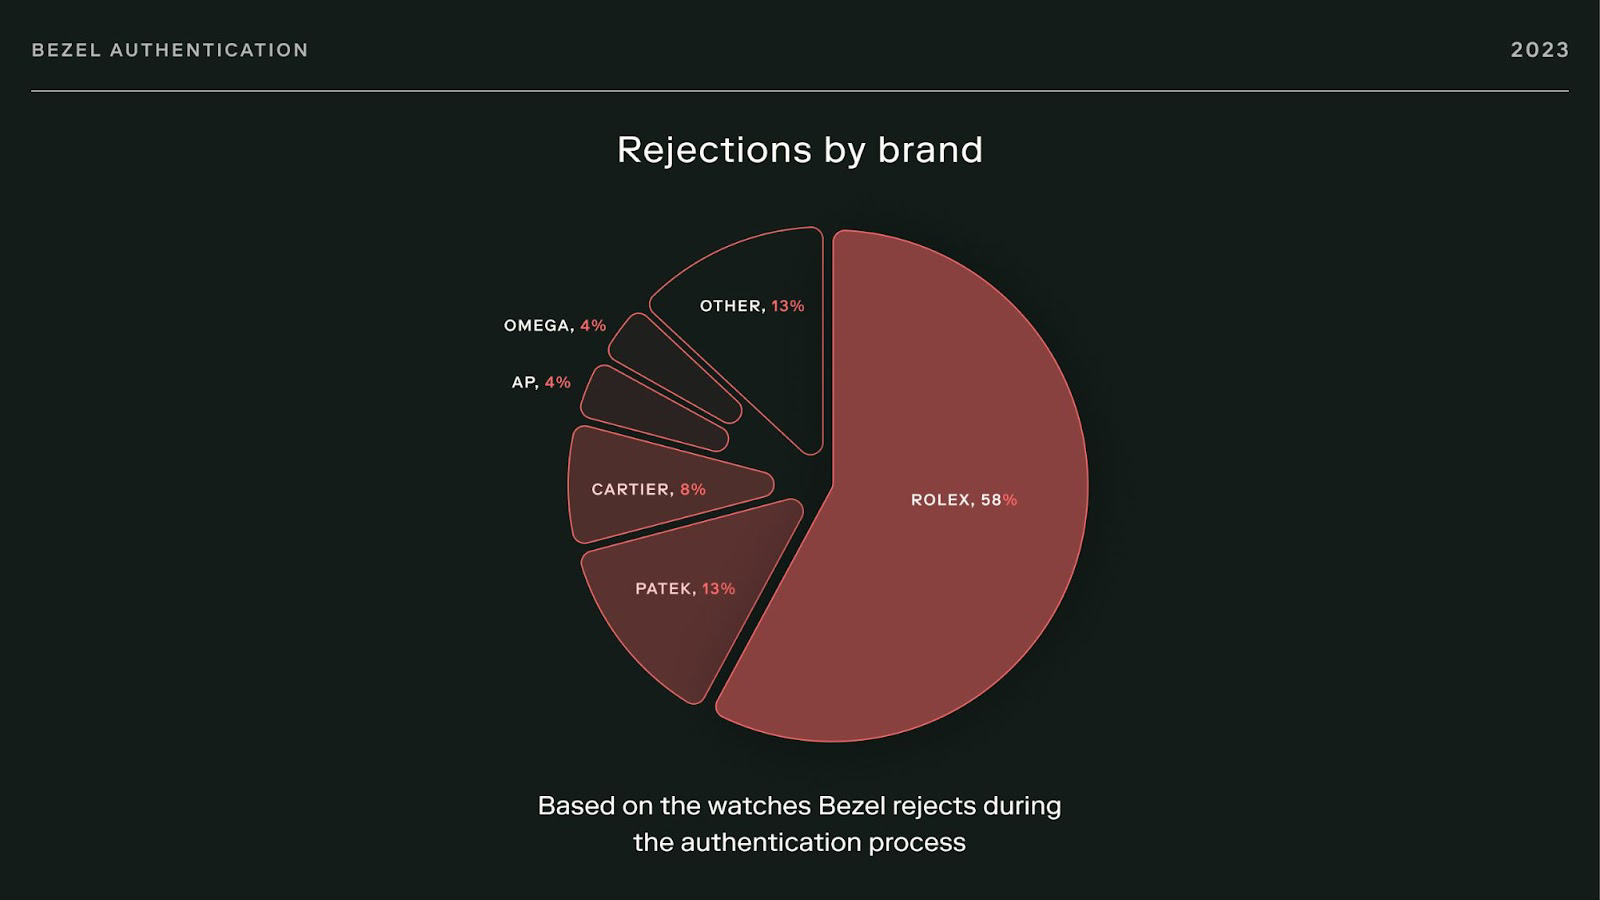 Bezel rejections by brand